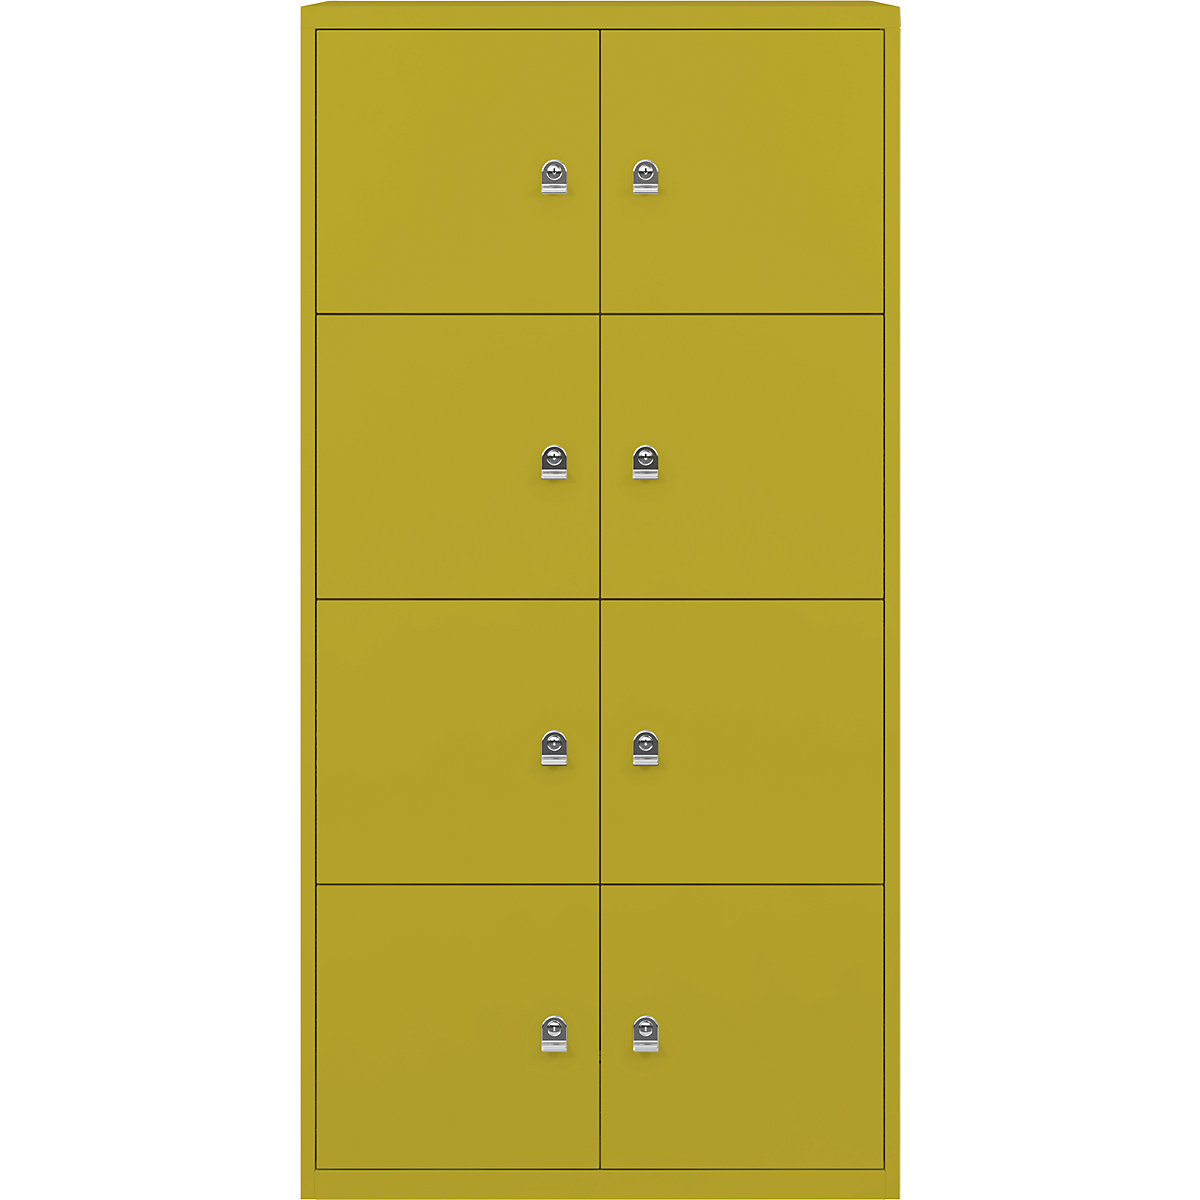 BISLEY – LateralFile™ lodge, with 8 lockable compartments, height 375 mm each, tickleweed